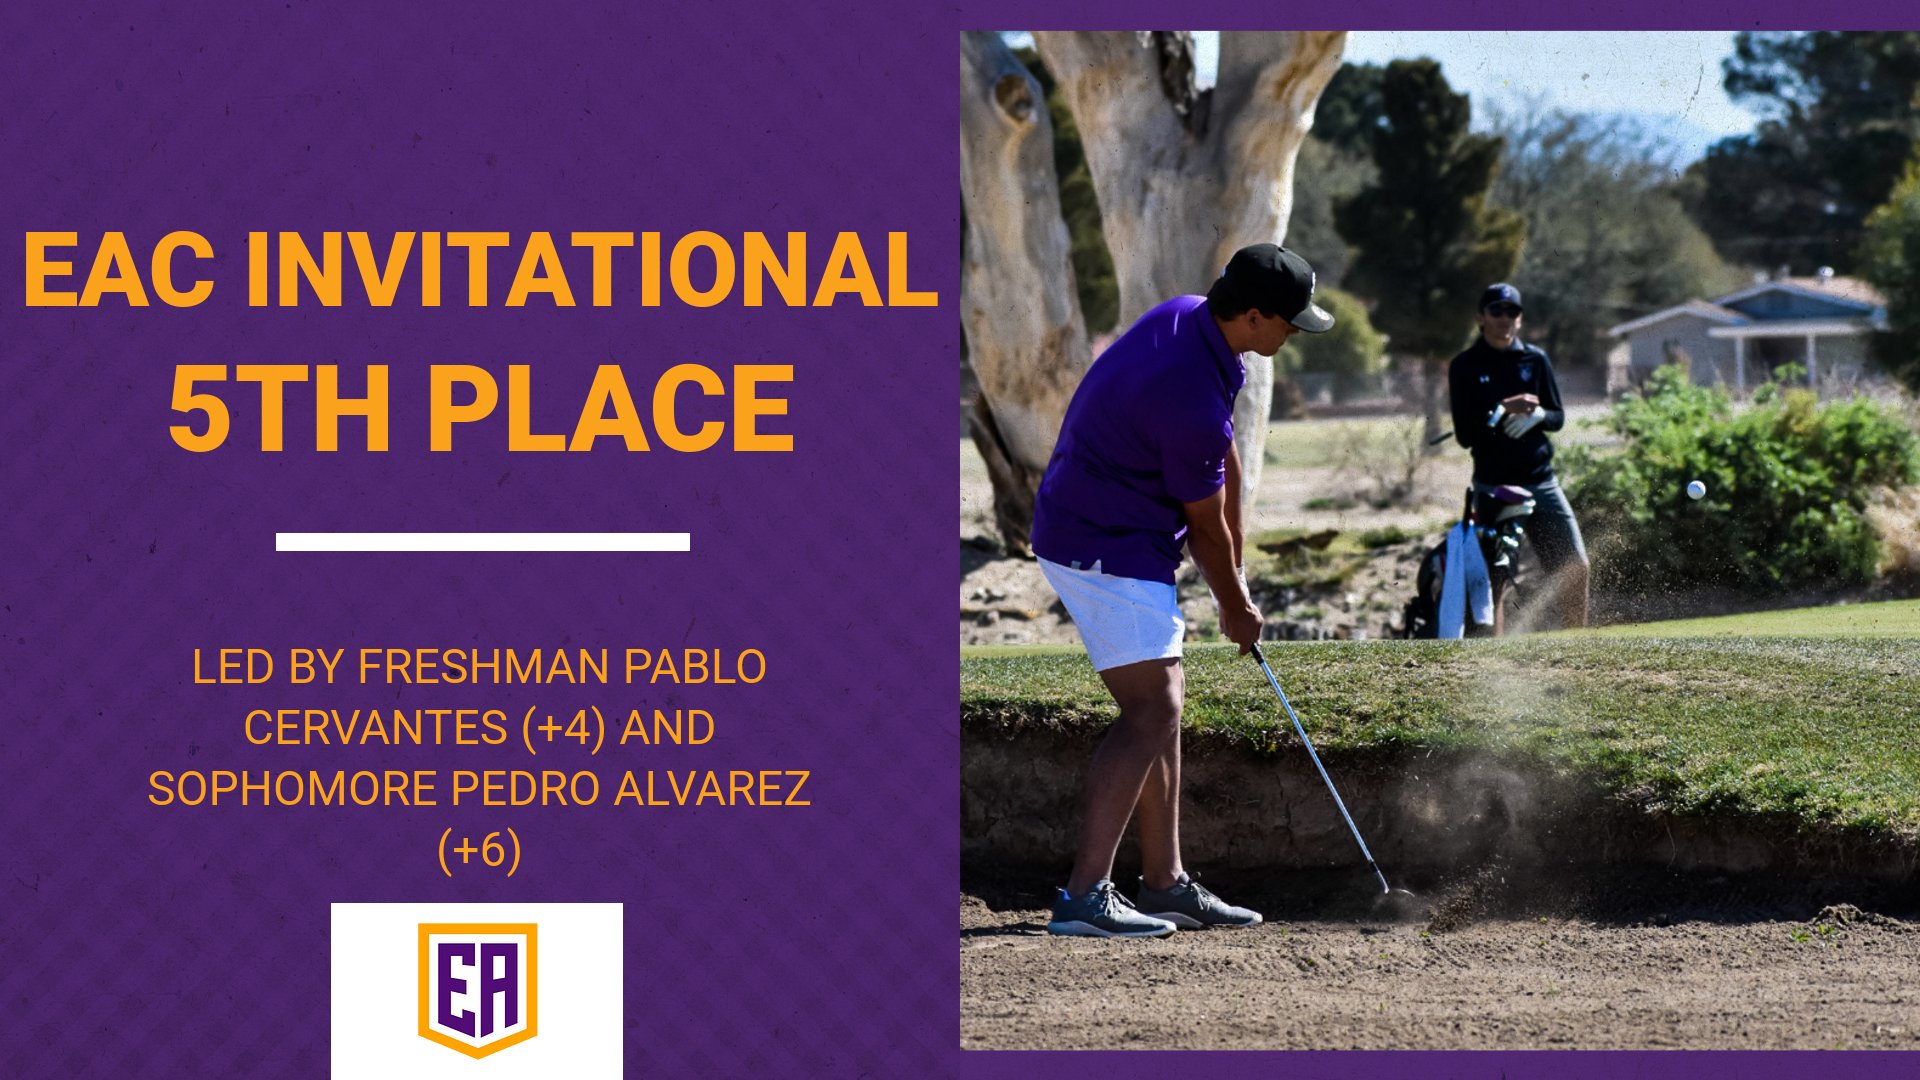 Led by Pablo Cerventes and Pedro Alvarez, EAC Takes 5th in EAC Invitational